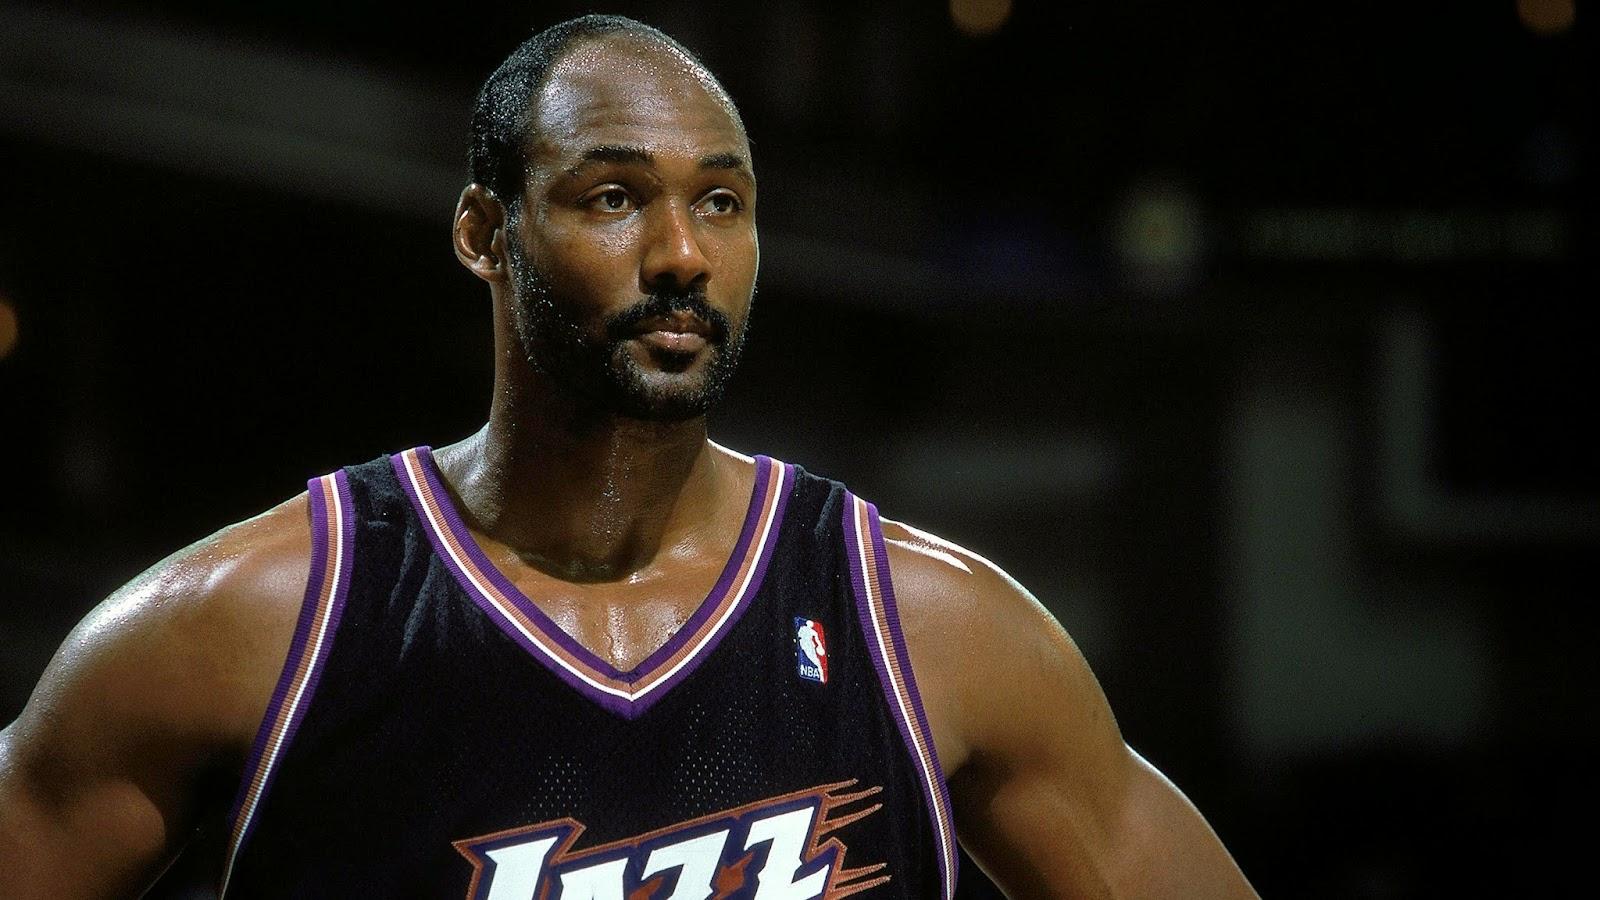 Watch: 'Jeopardy!' contestants stumped on question about Karl Malone